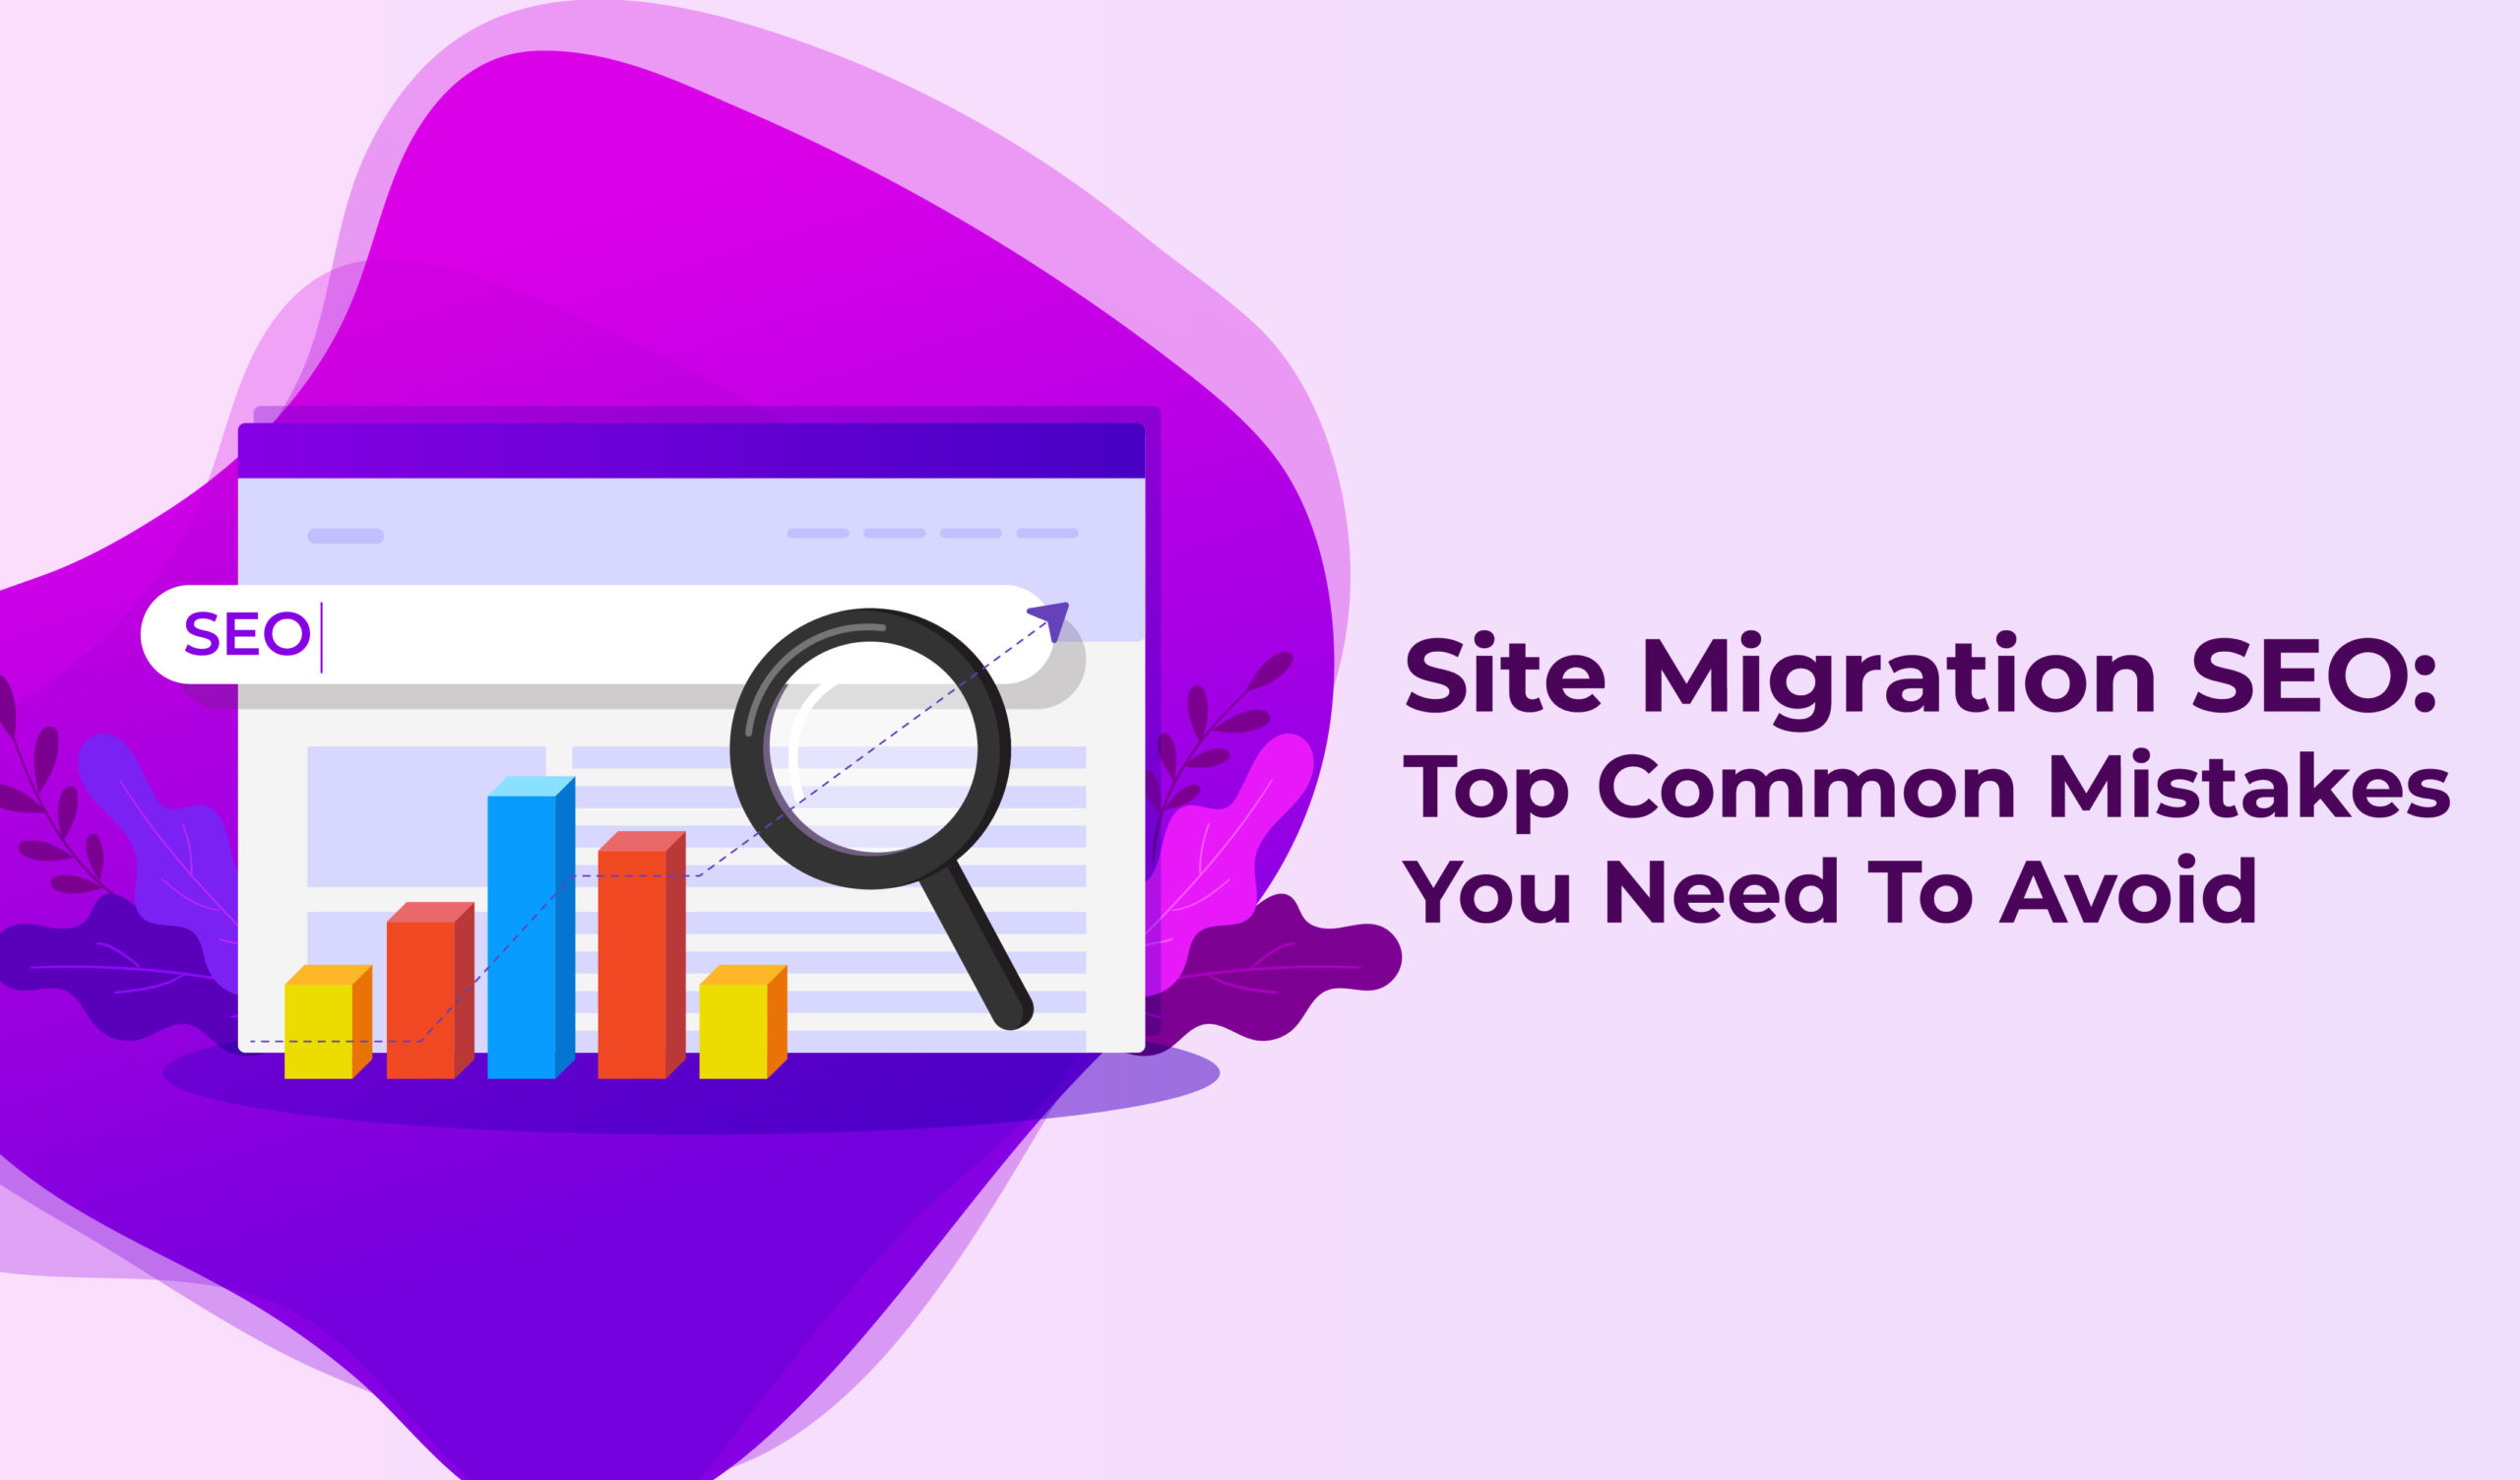 Site migration SEO: Top common mistakes you need to avoid